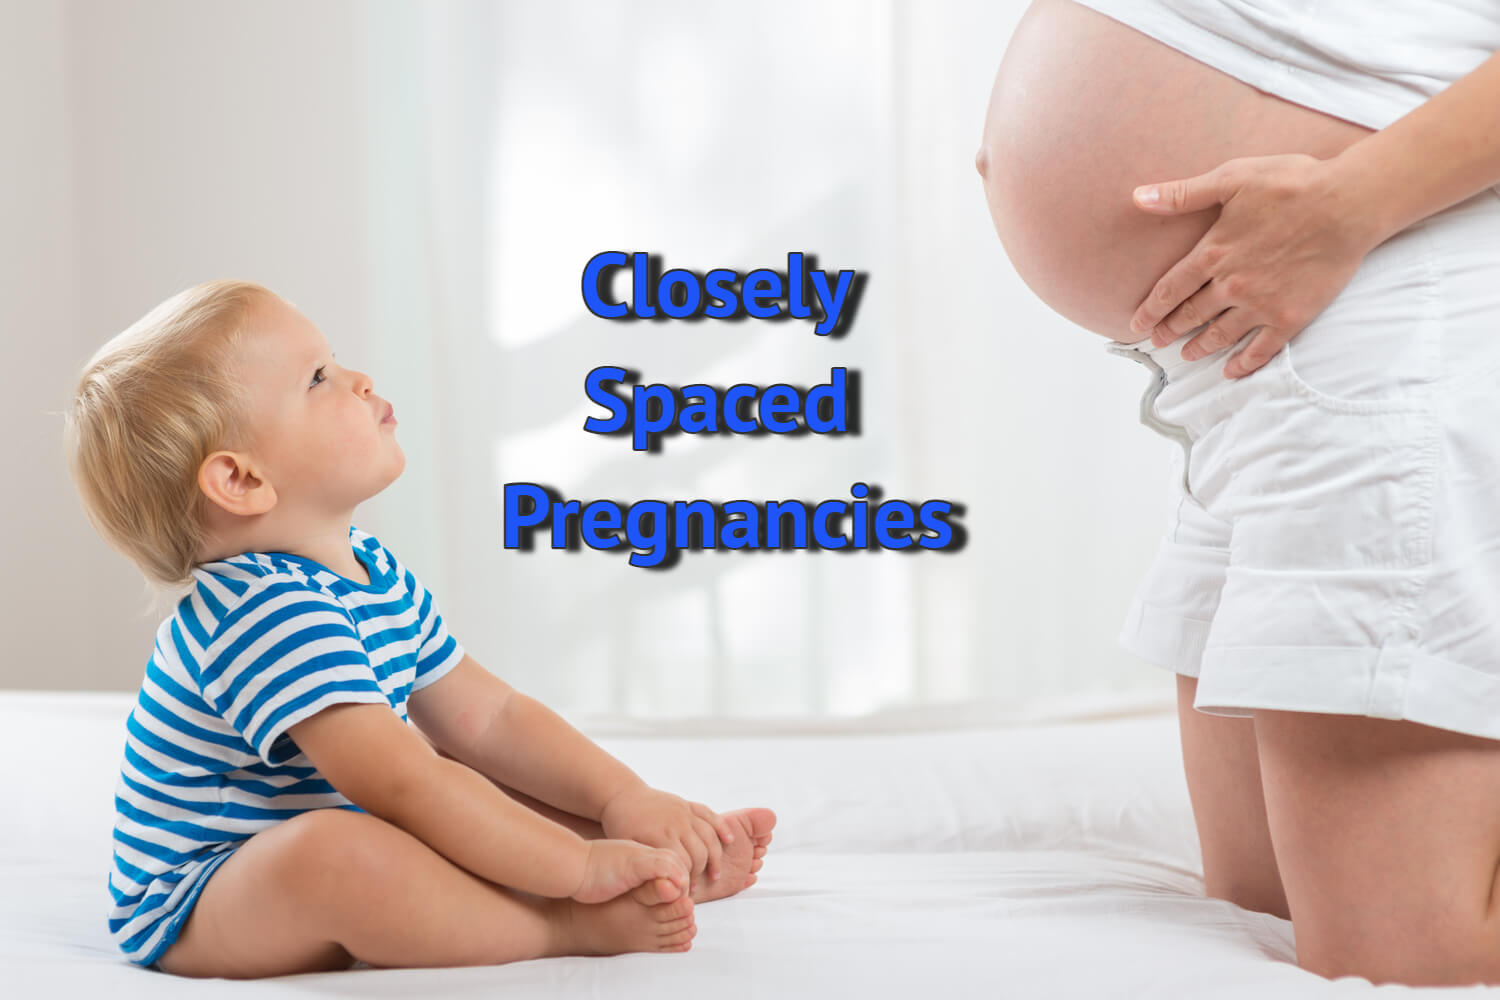 closely spaced pregnancies